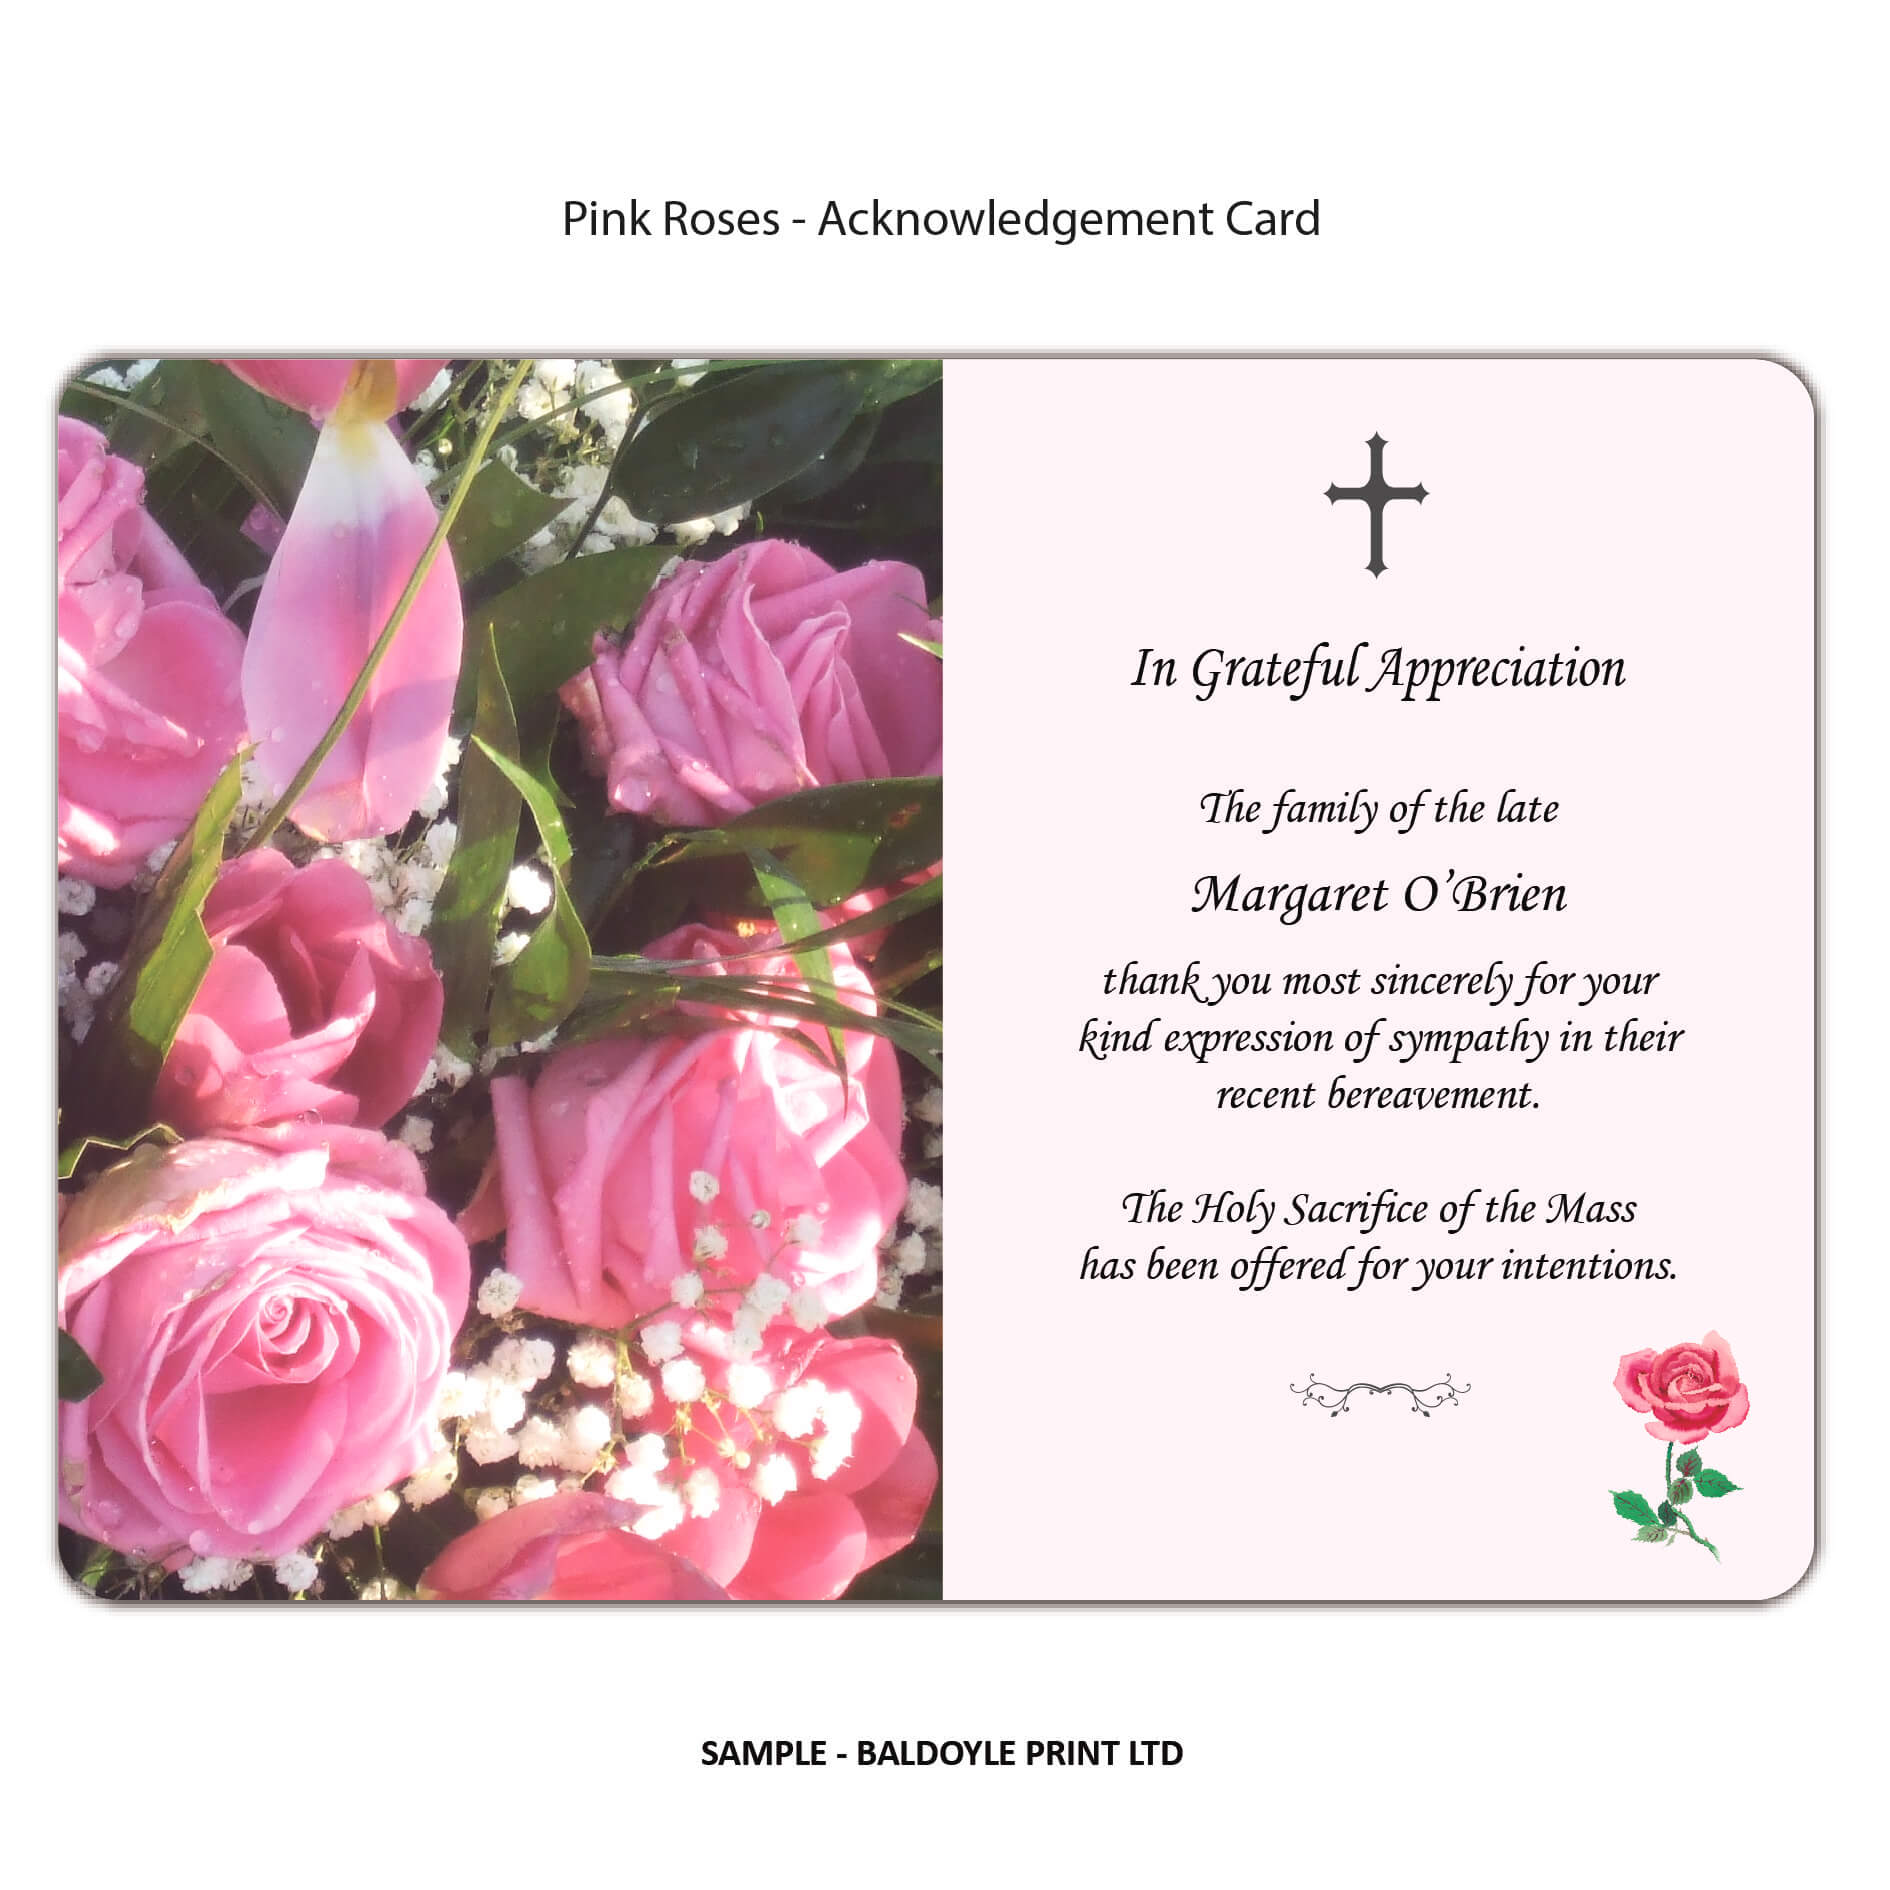 Pink Roses Acknowledgement Card